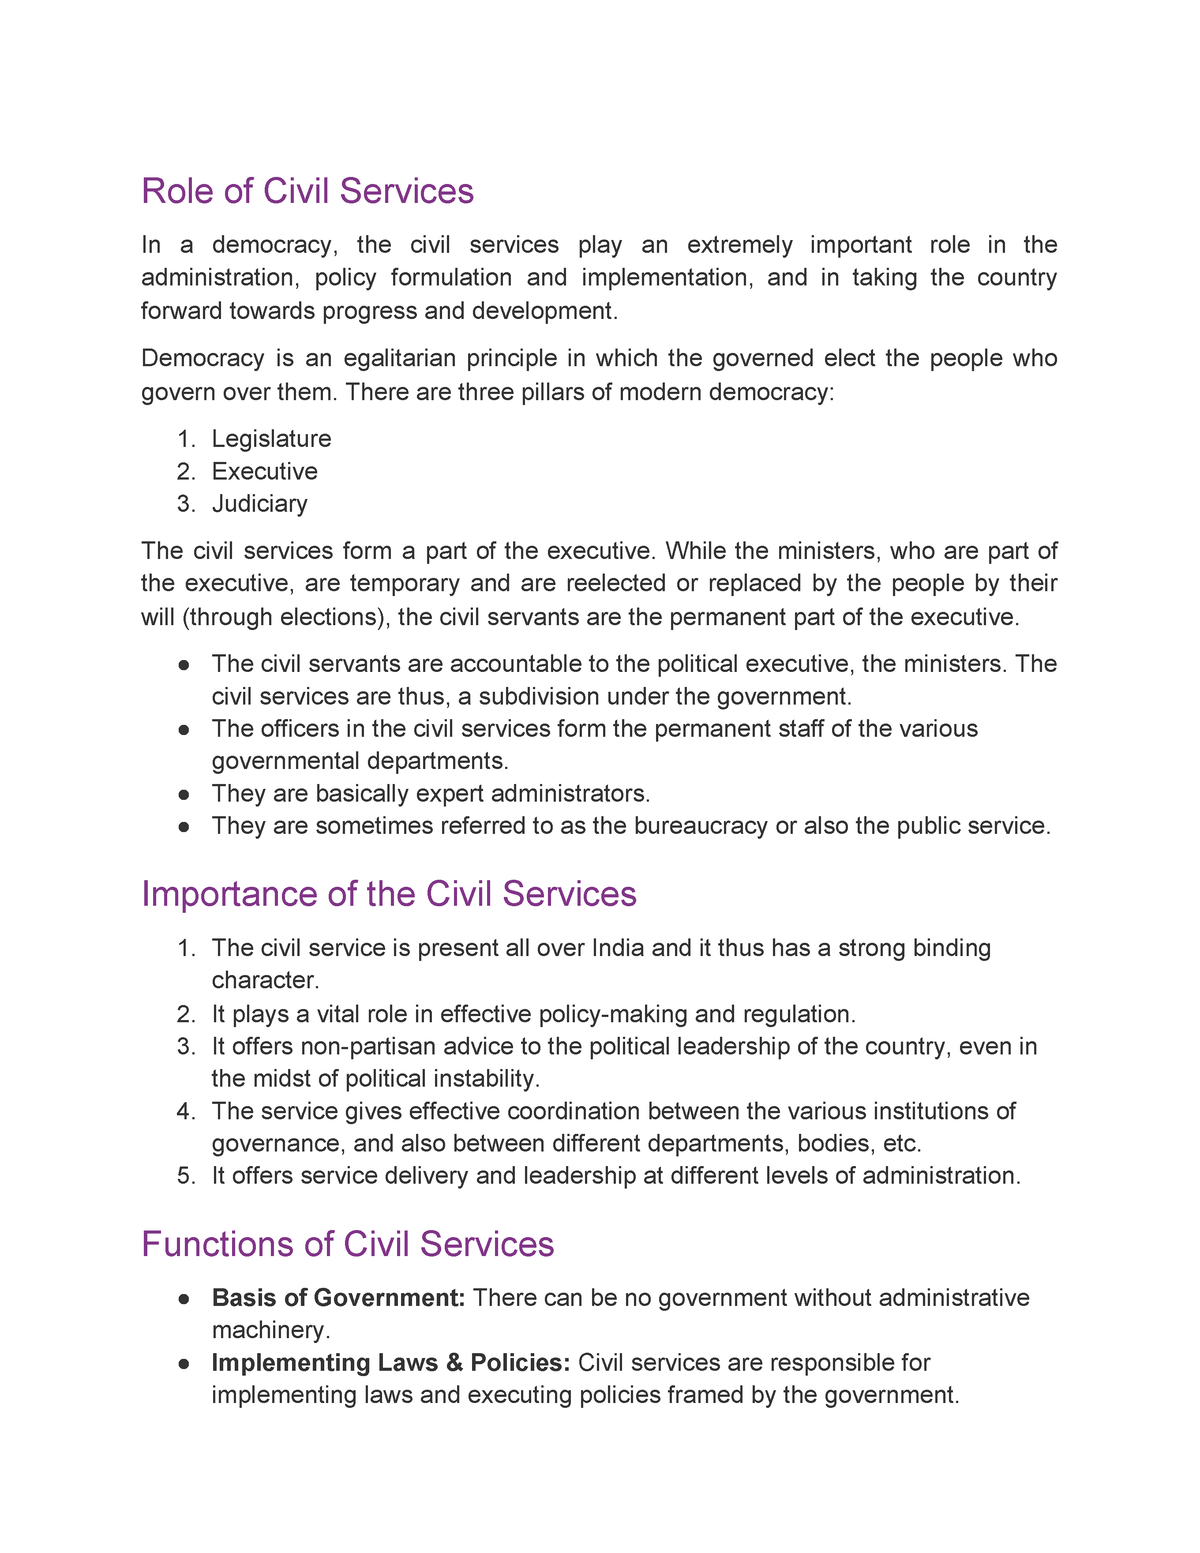 essay on civil services in india